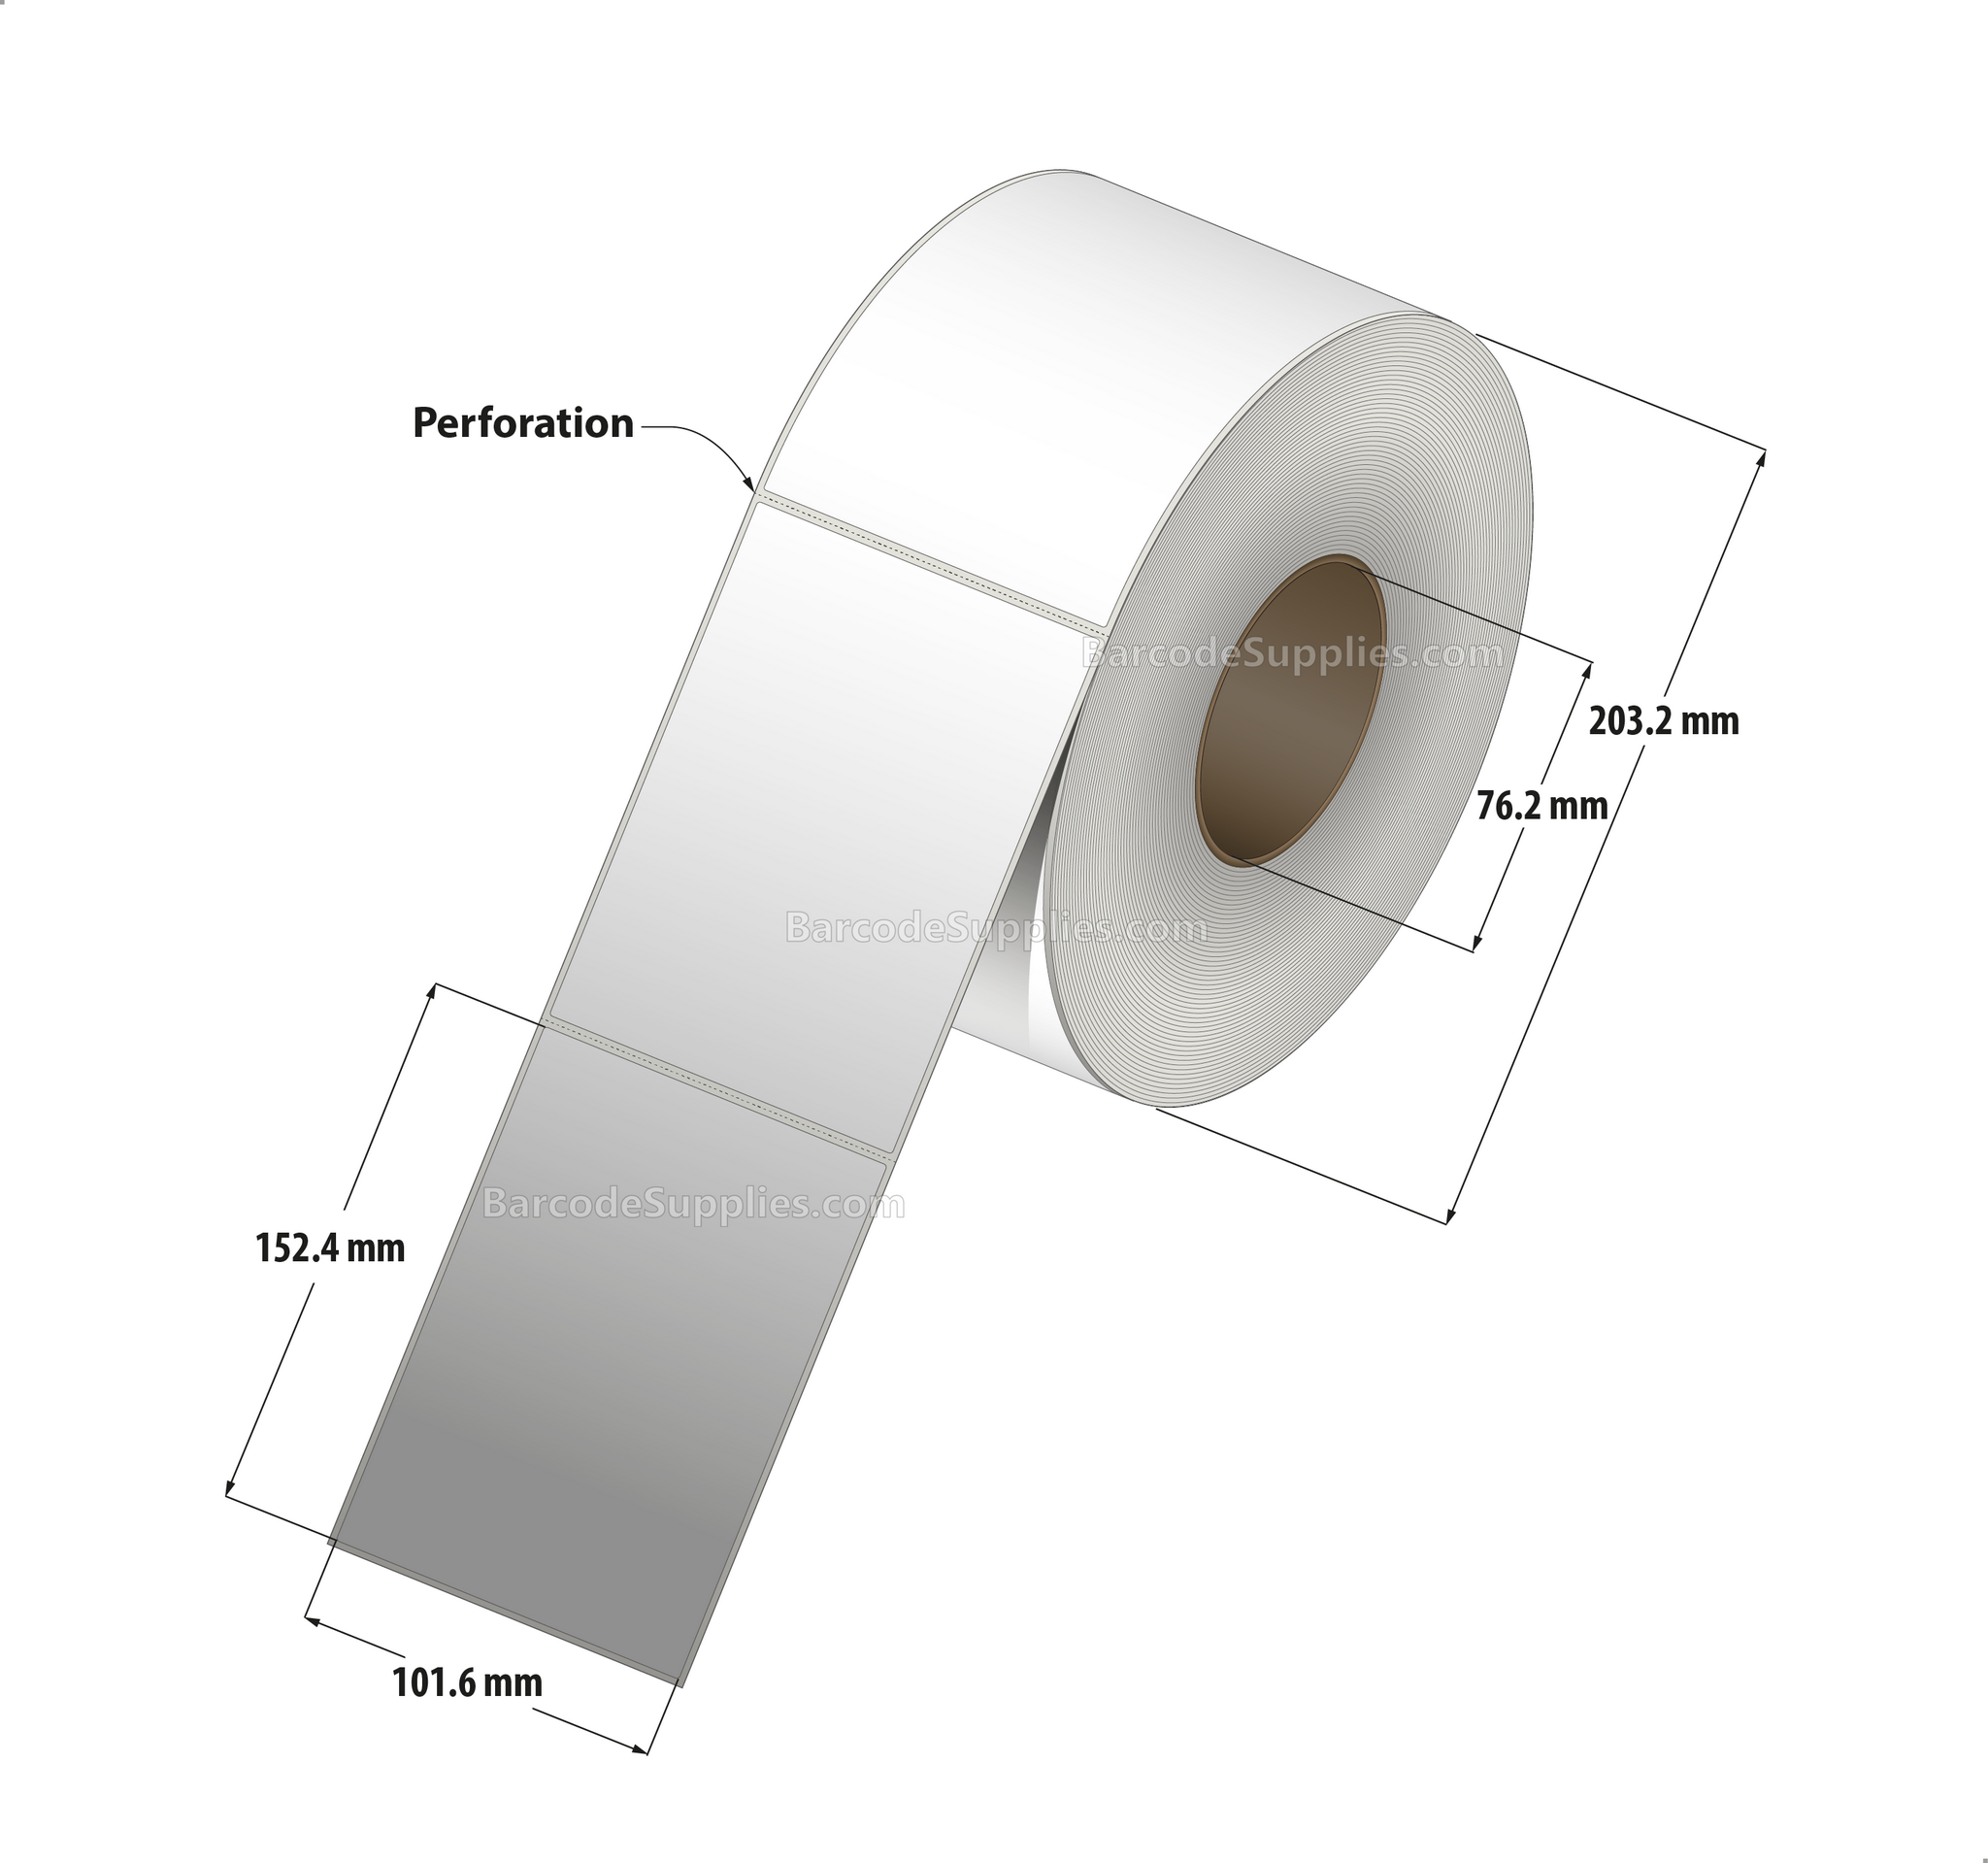 4 x 6 Thermal Transfer White Labels With Permanent Adhesive - Perforated - 1000 Labels Per Roll - Carton Of 4 Rolls - 4000 Labels Total - MPN: RT-4-6-1000-3